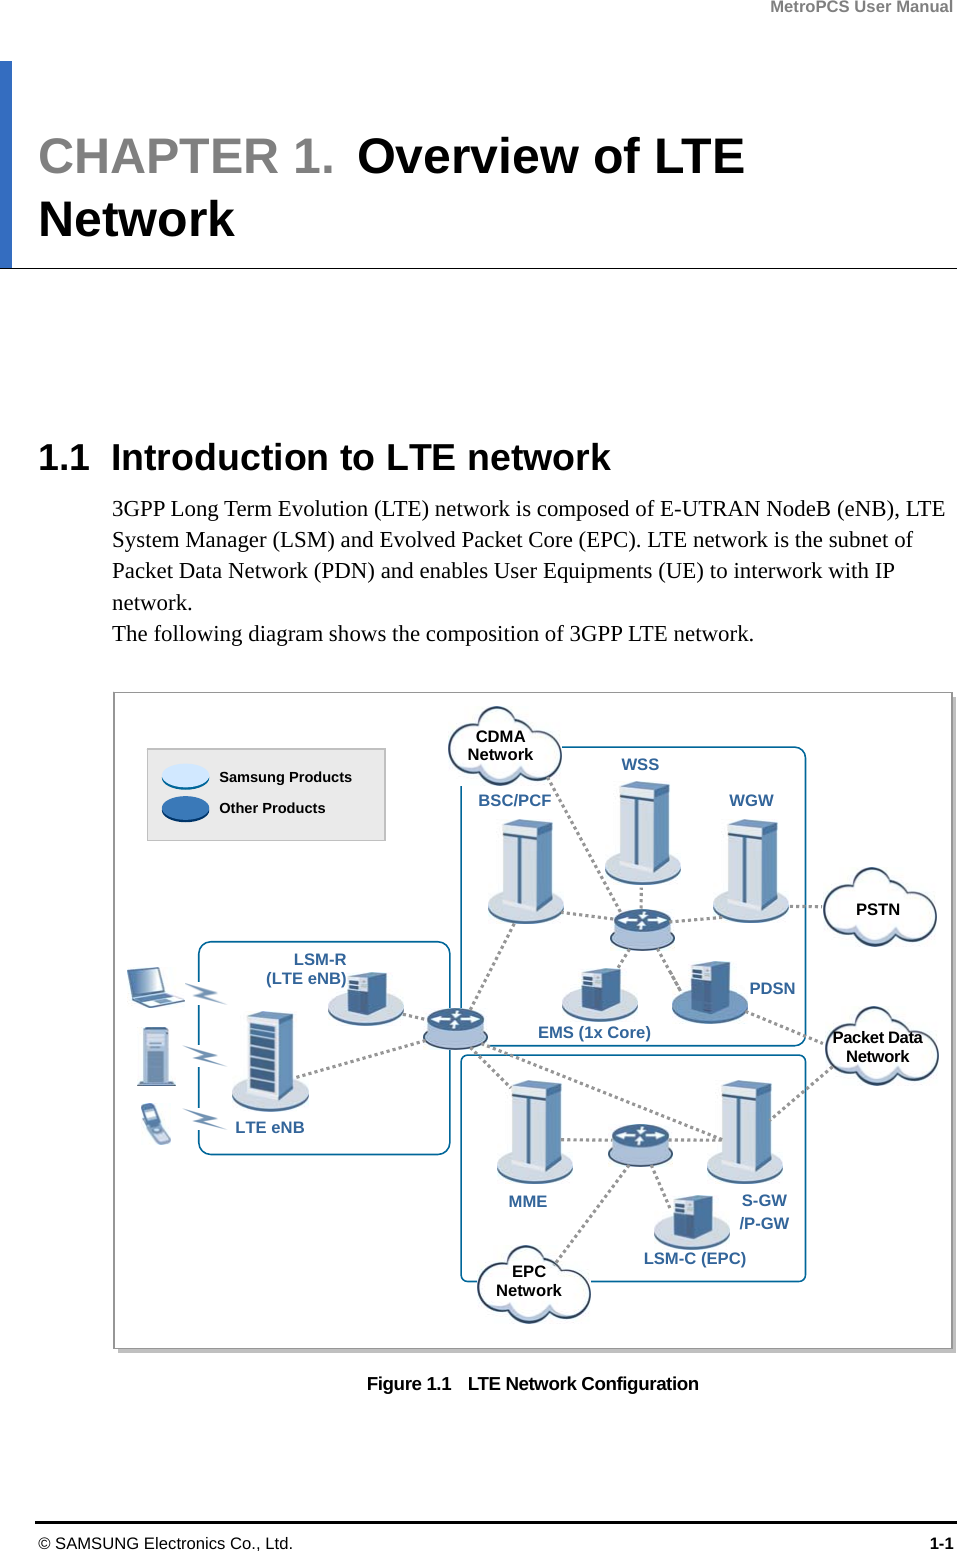 MetroPCS User Manual © SAMSUNG Electronics Co., Ltd.  1-1 CHAPTER 1.  Overview of LTE Network      1.1  Introduction to LTE network 3GPP Long Term Evolution (LTE) network is composed of E-UTRAN NodeB (eNB), LTE System Manager (LSM) and Evolved Packet Core (EPC). LTE network is the subnet of Packet Data Network (PDN) and enables User Equipments (UE) to interwork with IP network. The following diagram shows the composition of 3GPP LTE network.  Figure 1.1    LTE Network Configuration   PSTN Packet DataNetwork LTE eNB LSM-R (LTE eNB) BSC/PCF WSS WGW EMS (1x Core) PDSN MME  S-GW /P-GWLSM-C (EPC) Samsung Products Other Products EPCNetwork  CDMANetwork 